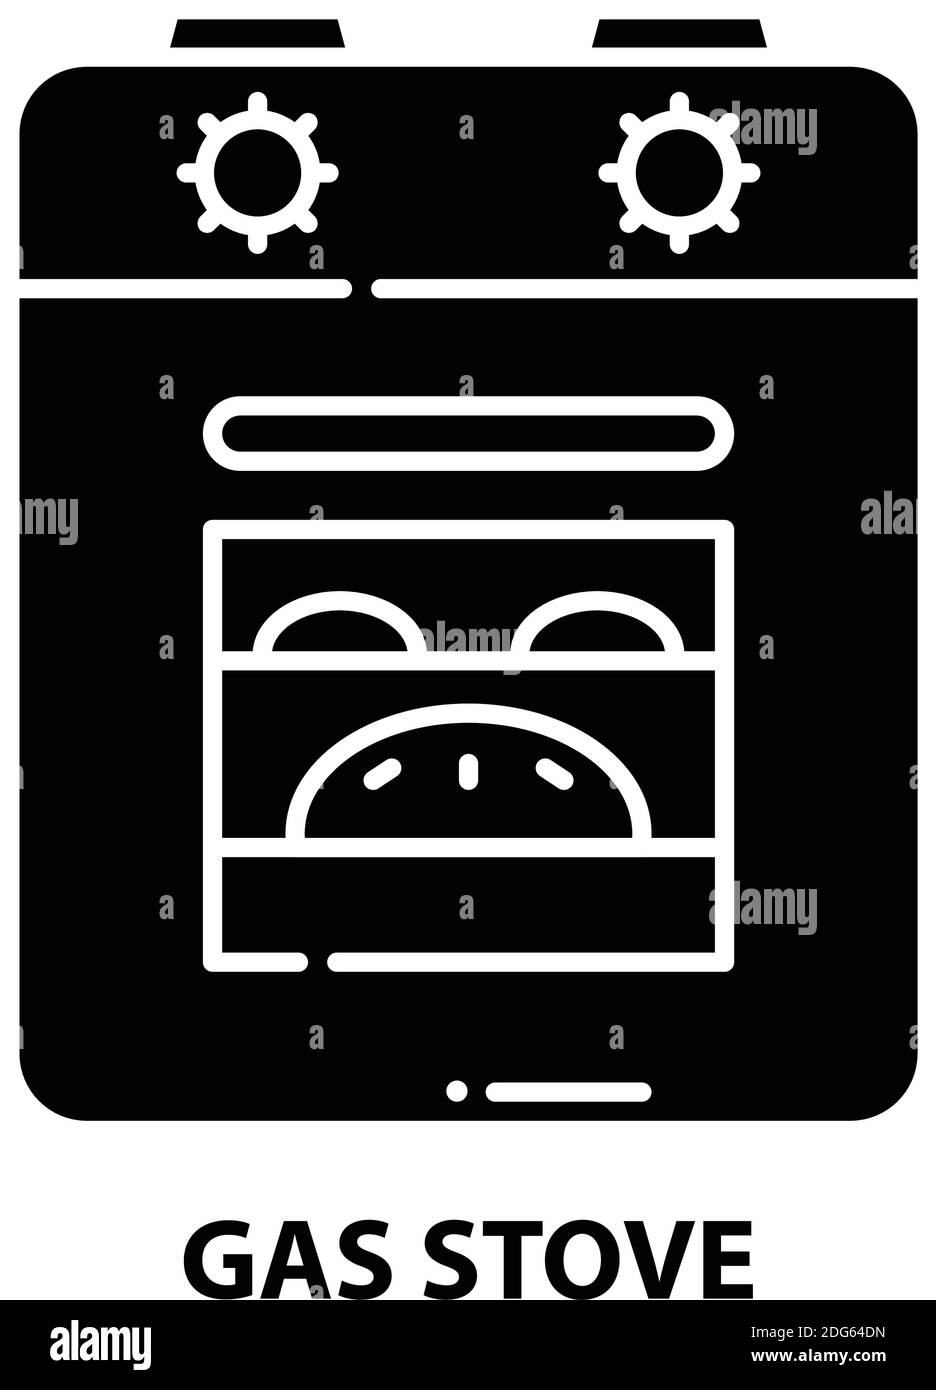 gas stove icon, black vector sign with editable strokes, concept illustration Stock Vector